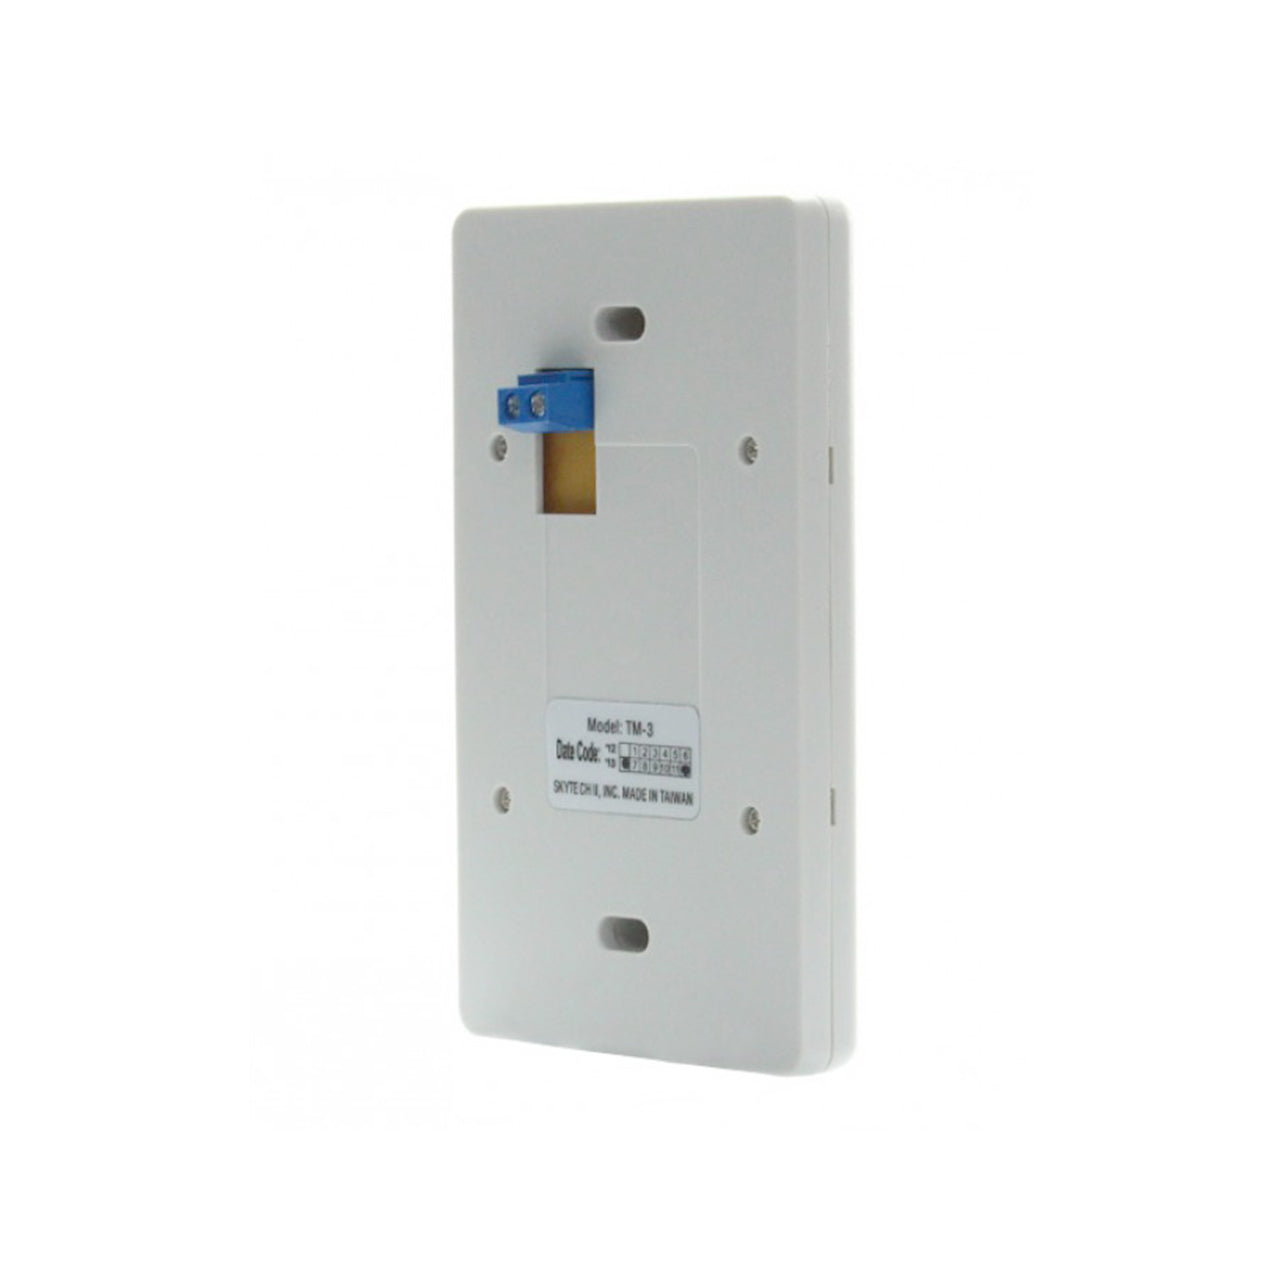 Skytech TM-3 Wired Wall Mounted Timer Fireplace Control